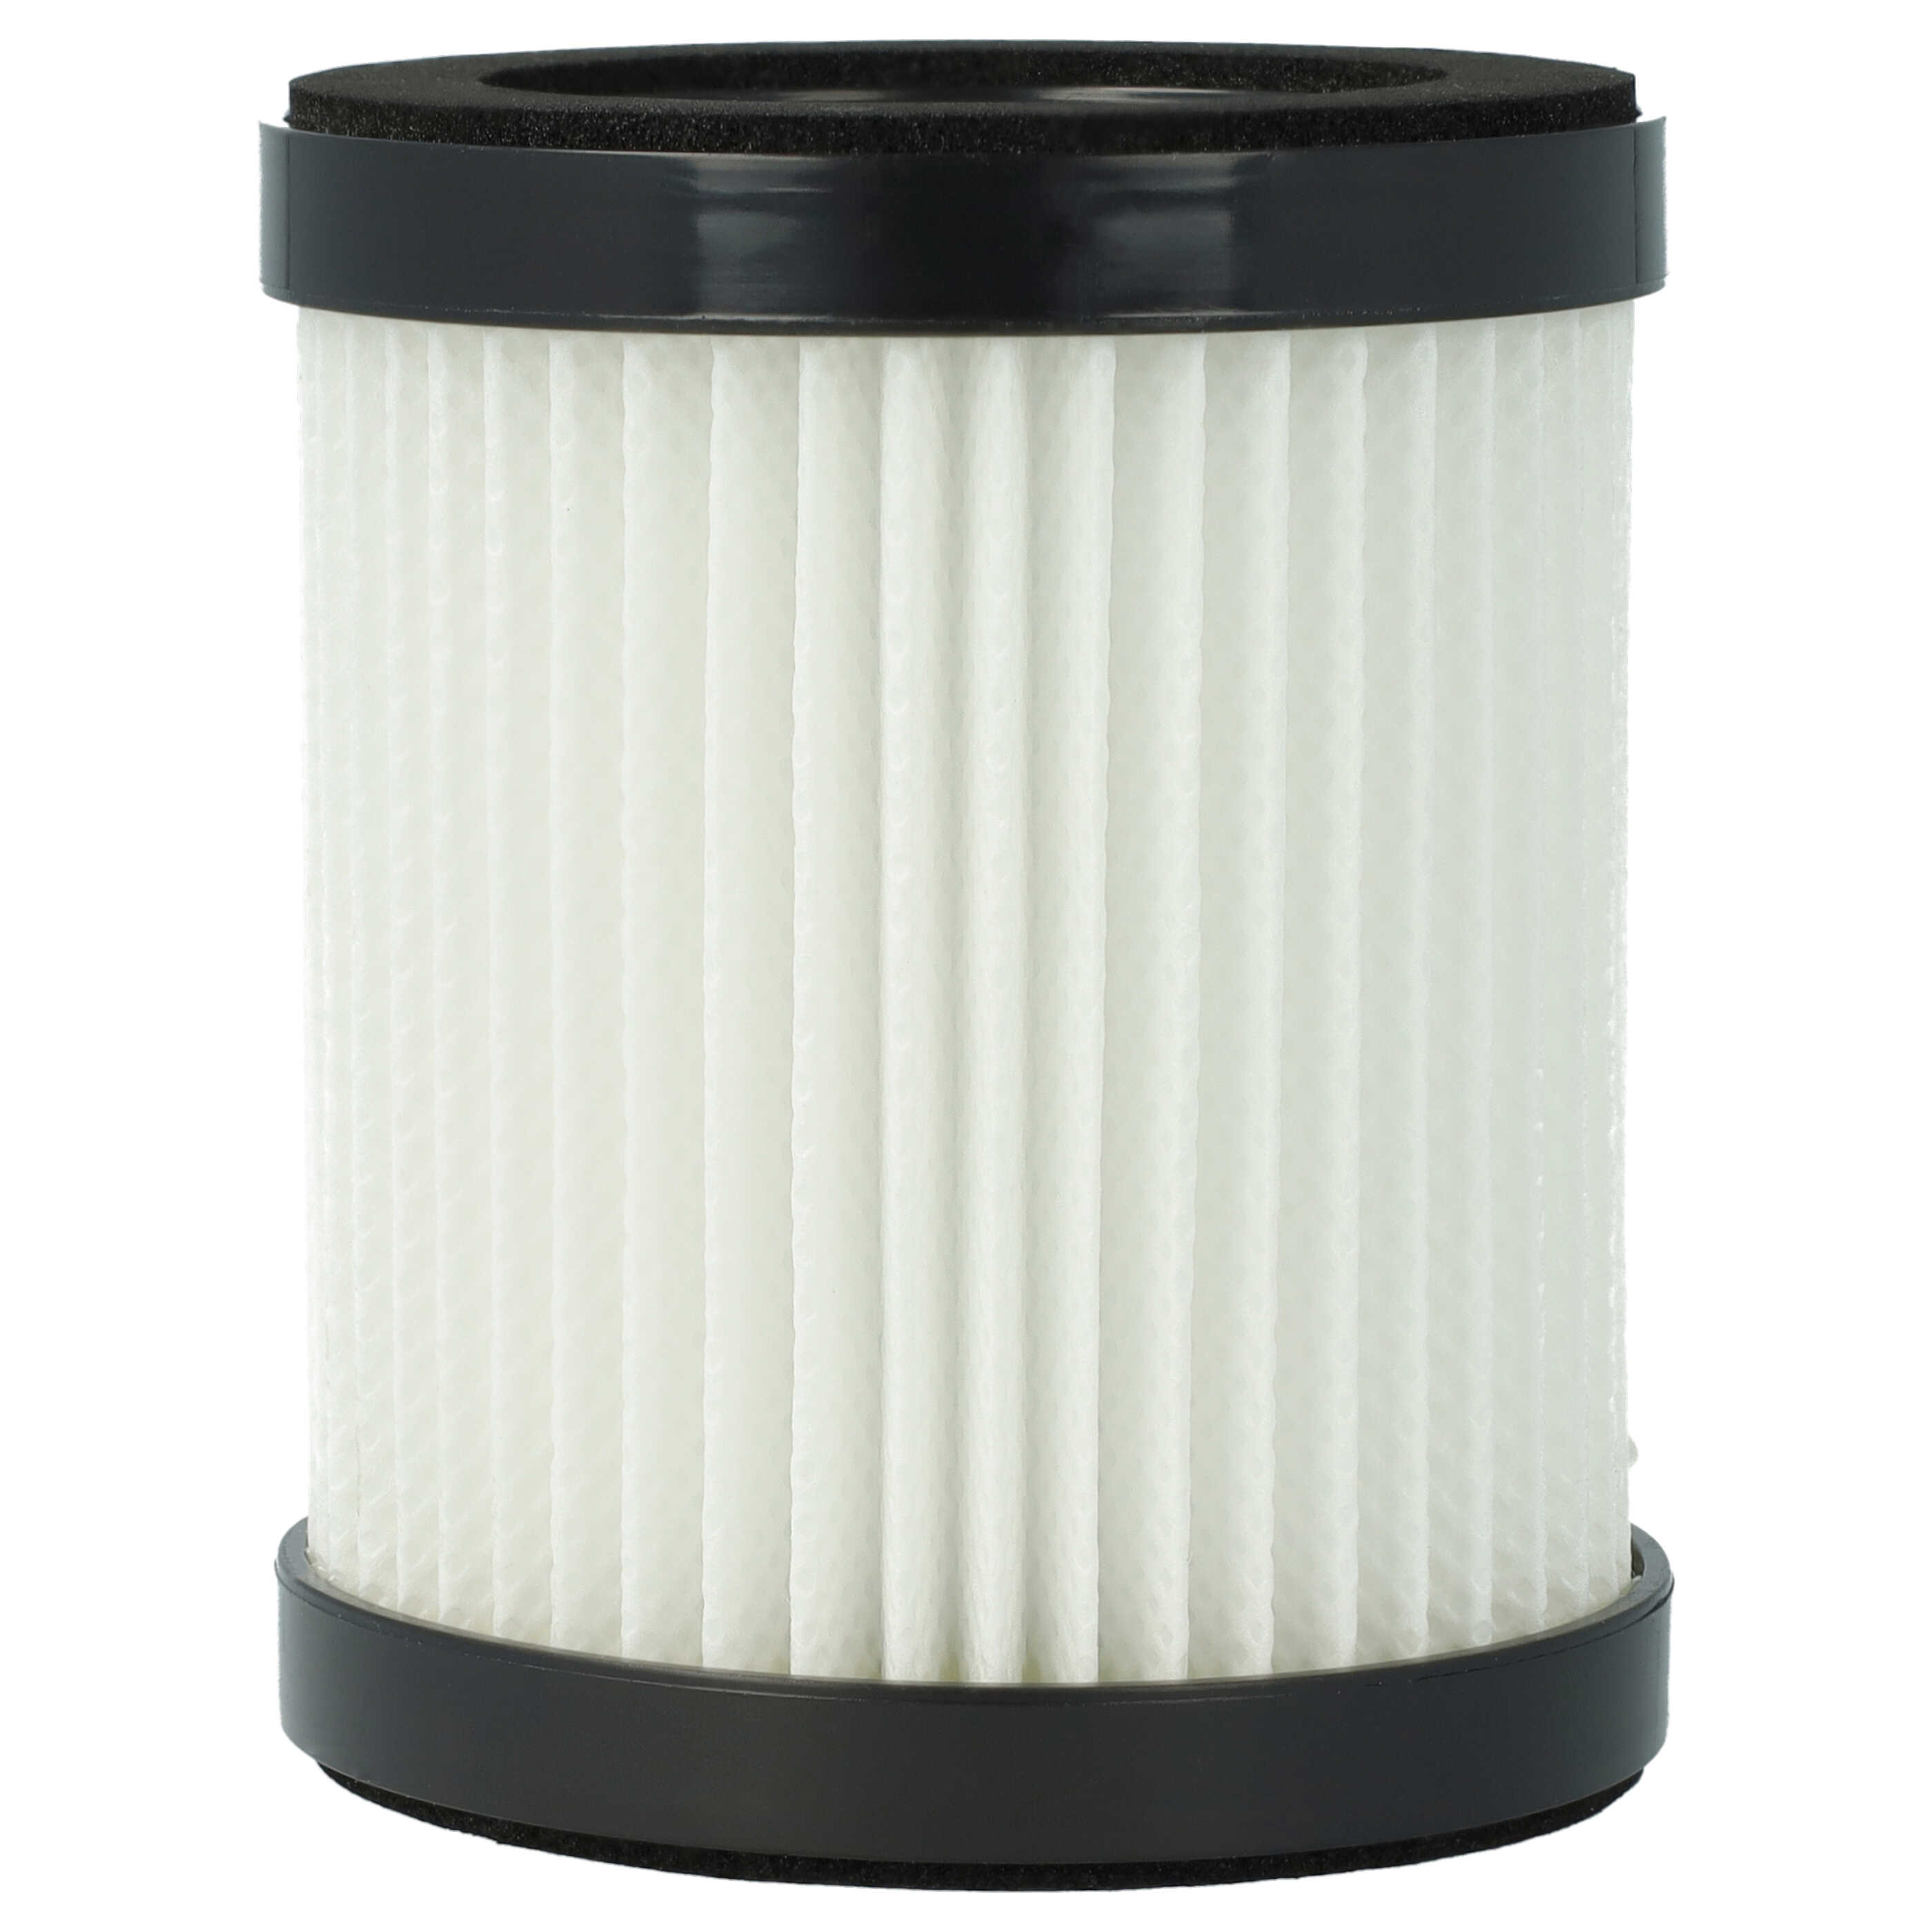 2x filter suitable for XL-618A Moosoo, Beldray XL-618A Vacuum Cleaner